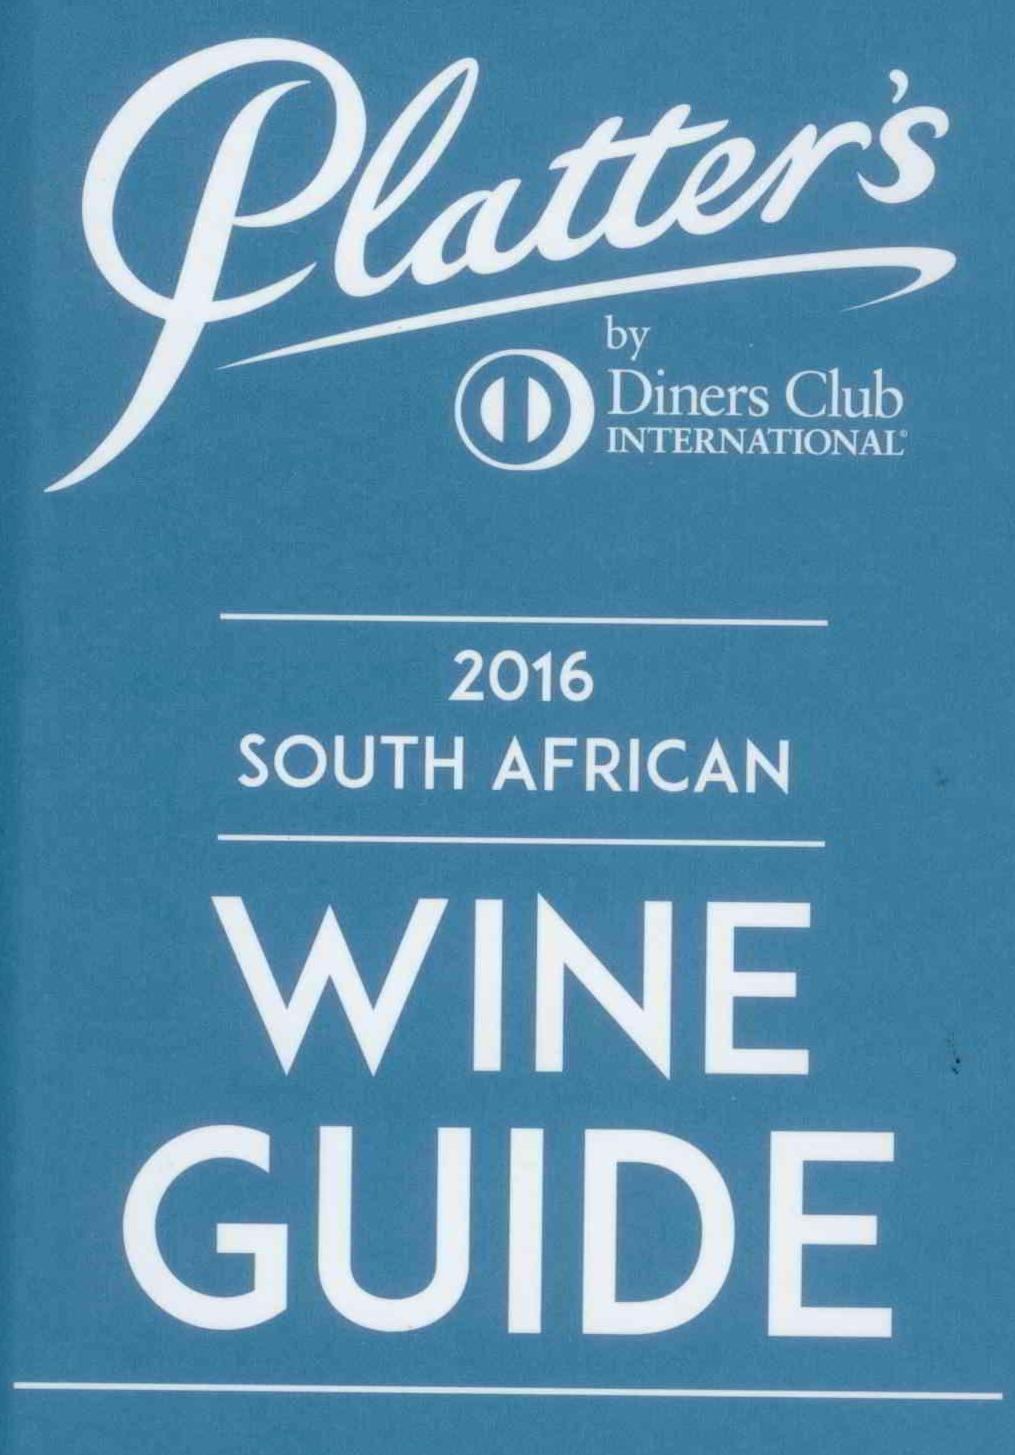 Wine Tours of Hermanus with Percy Tours in the John Platter wine book of South Africa